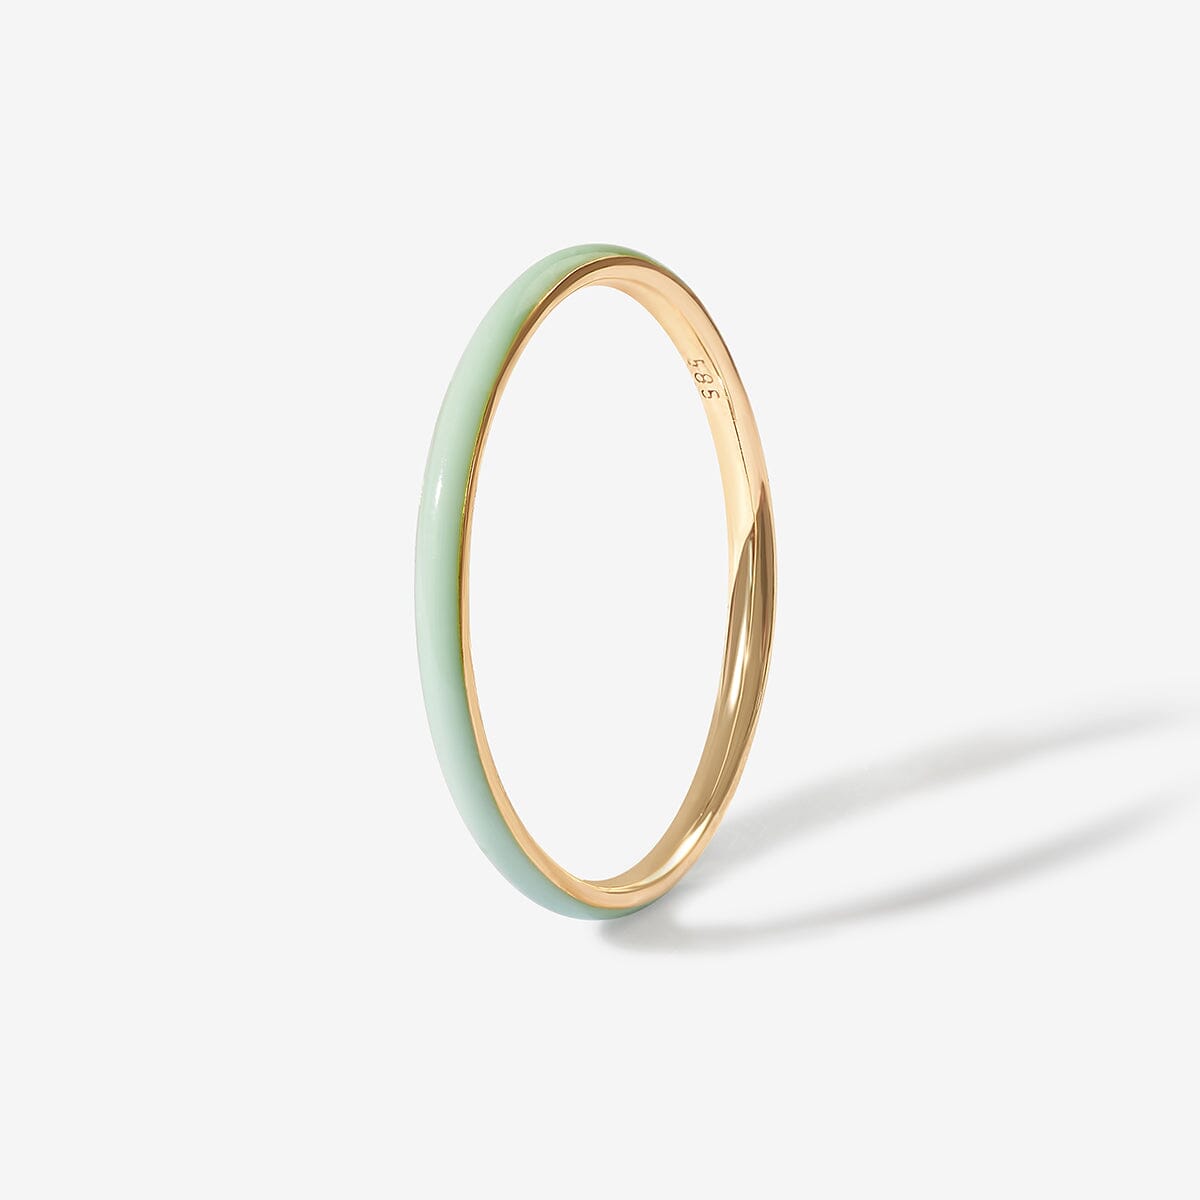 White Gold Thin Bangle with Letter N in Diamonds - Jade Jewellery